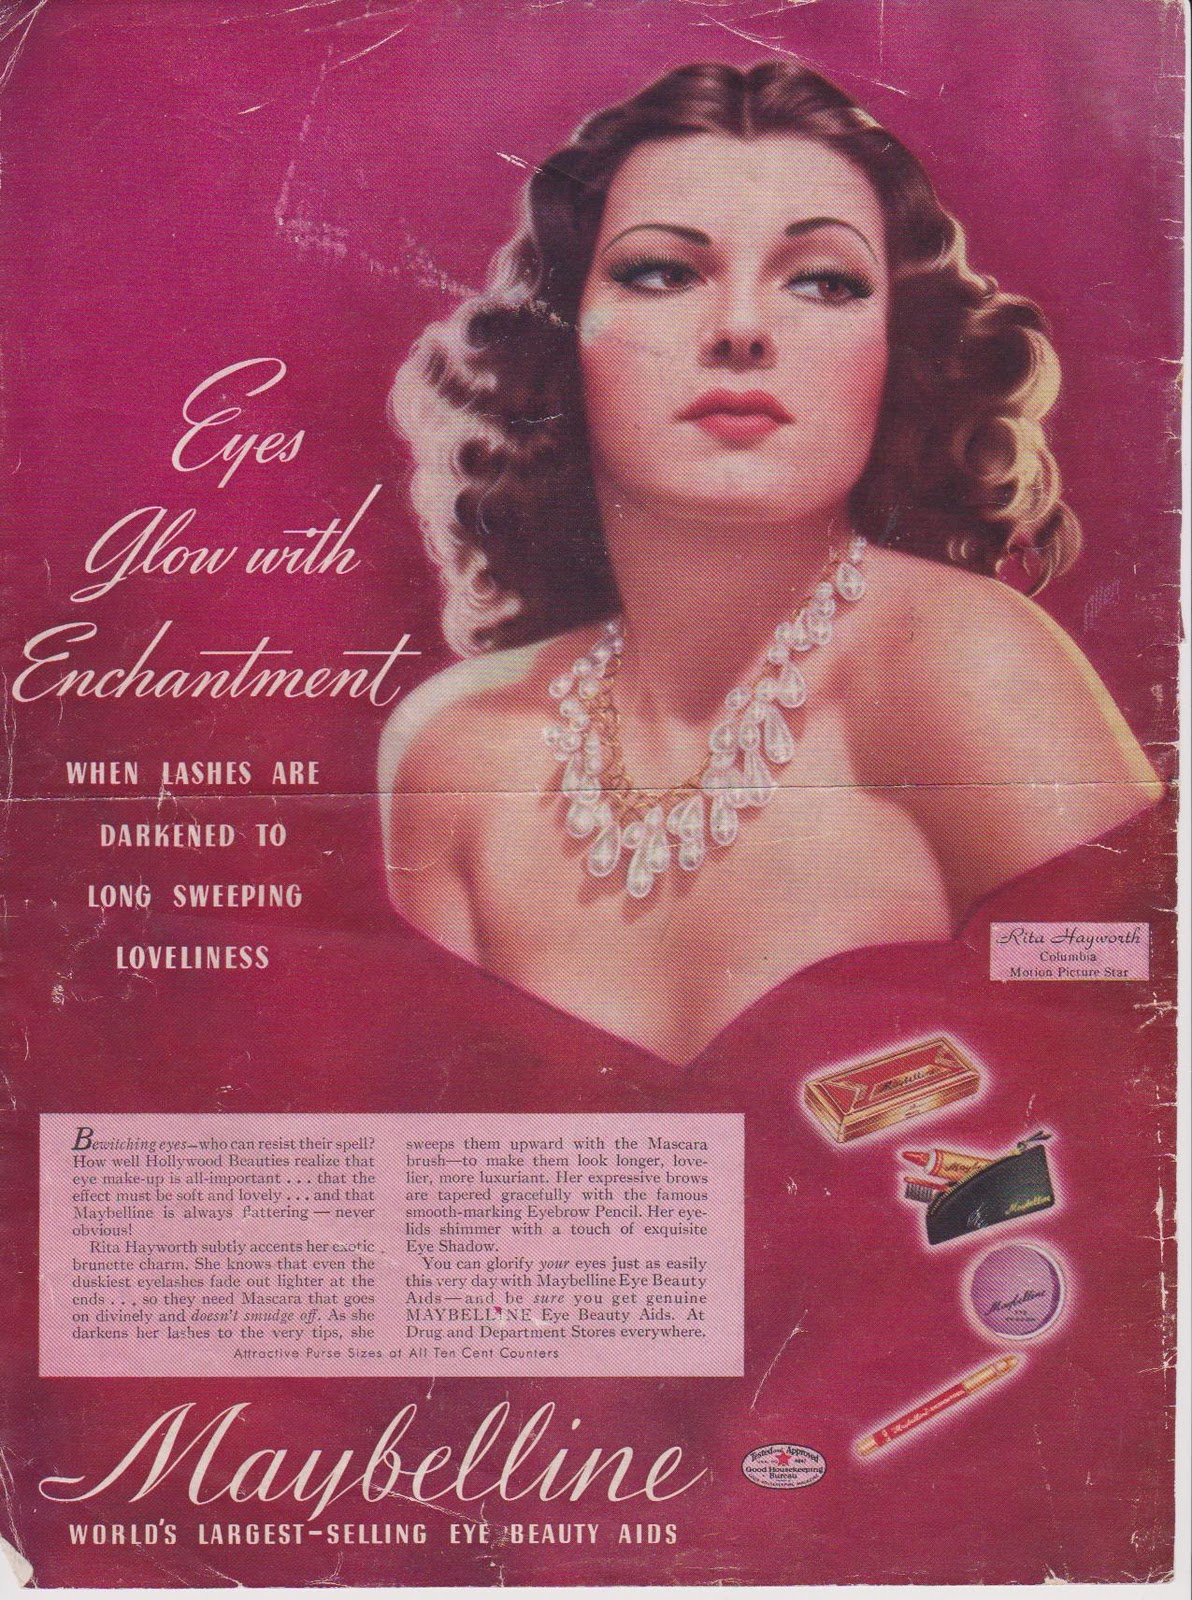 THE MAYBELLINE STORY : 1940s Maybelline Model, Rita Hayworth a favorite GI  Pin Up Girl.